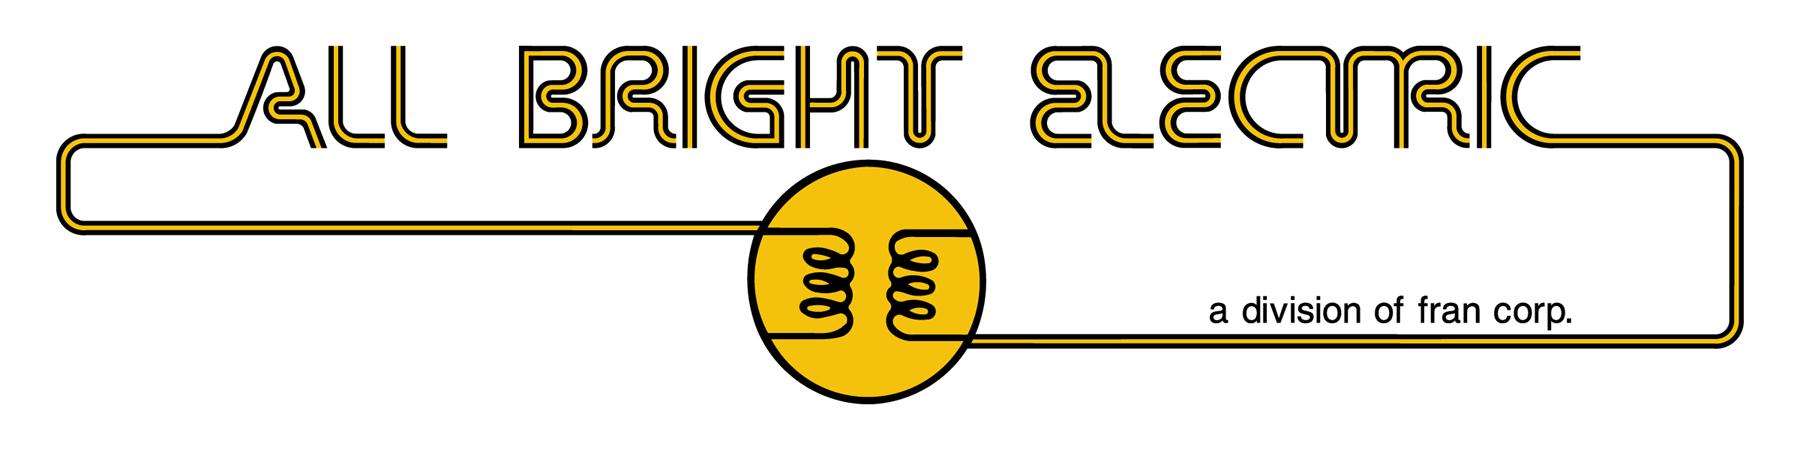 AllBright Electric